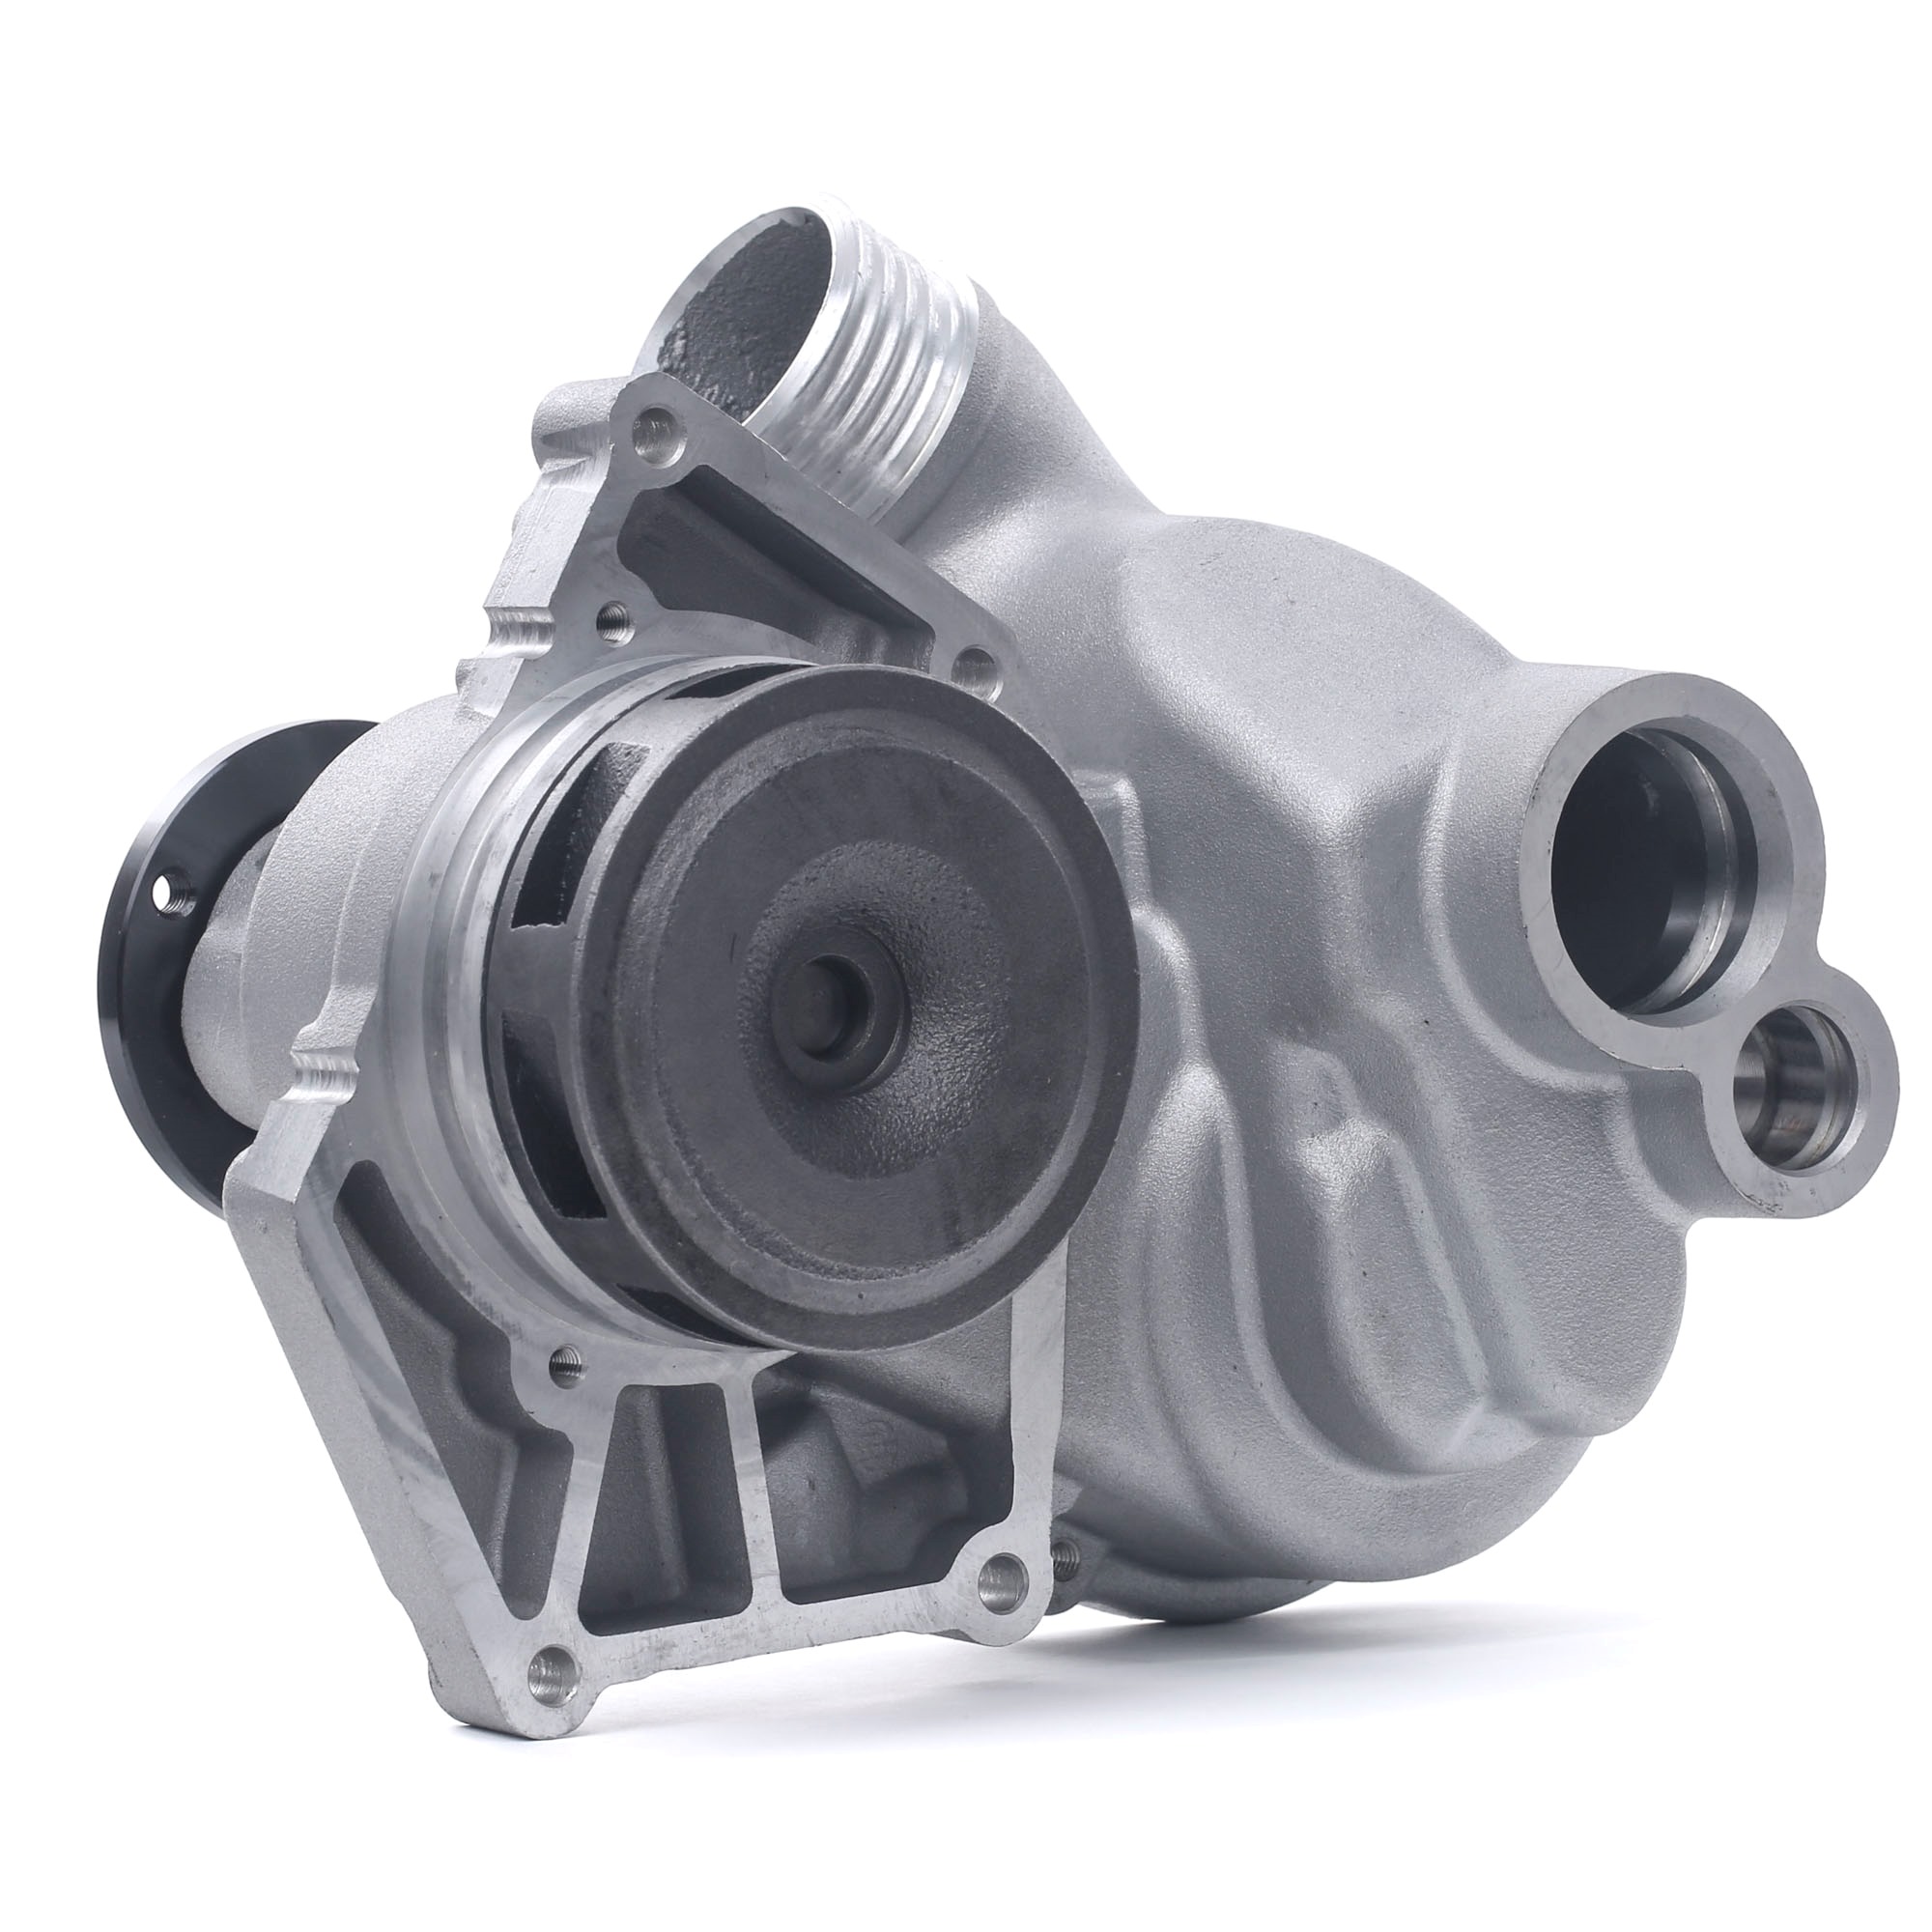 RIDEX 1260W0477 Water pump with seal, with flange, Mechanical, Metal impeller, for v-ribbed belt use